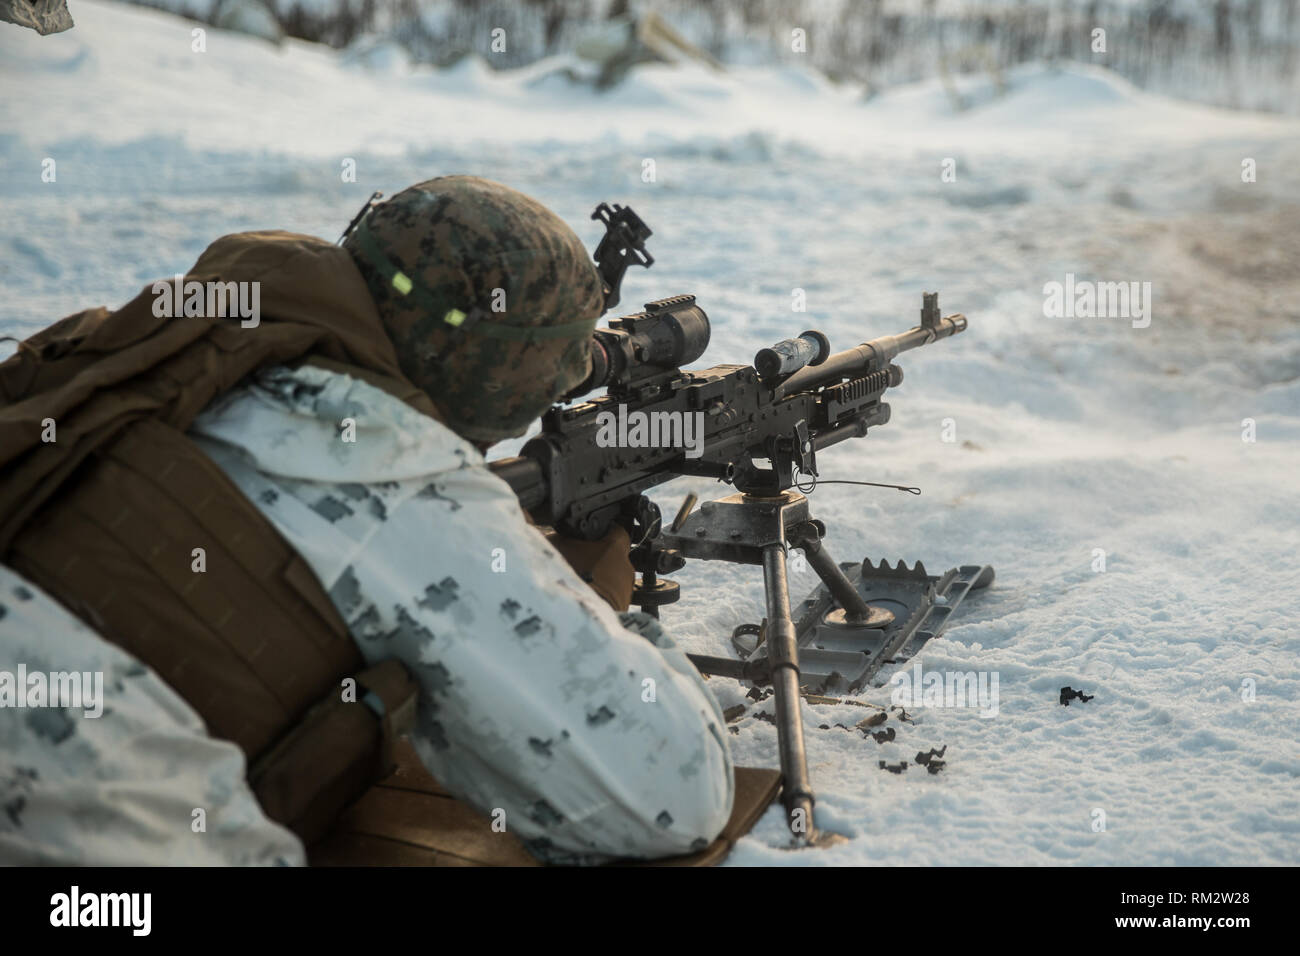 A U.S. Marine with Marine Rotational Force-Europe 19.1, Marine Forces Europe and Africa, fires a M240B machine gun in Setermoen, Norway, Feb. 8, 2019. This training increased MRF-E Marines’ proficiency at cold-weather and mountain-warfare tactical operations in cold-weather environments. (U.S. Marine Corps photo by Cpl. Nghia Tran) Stock Photo